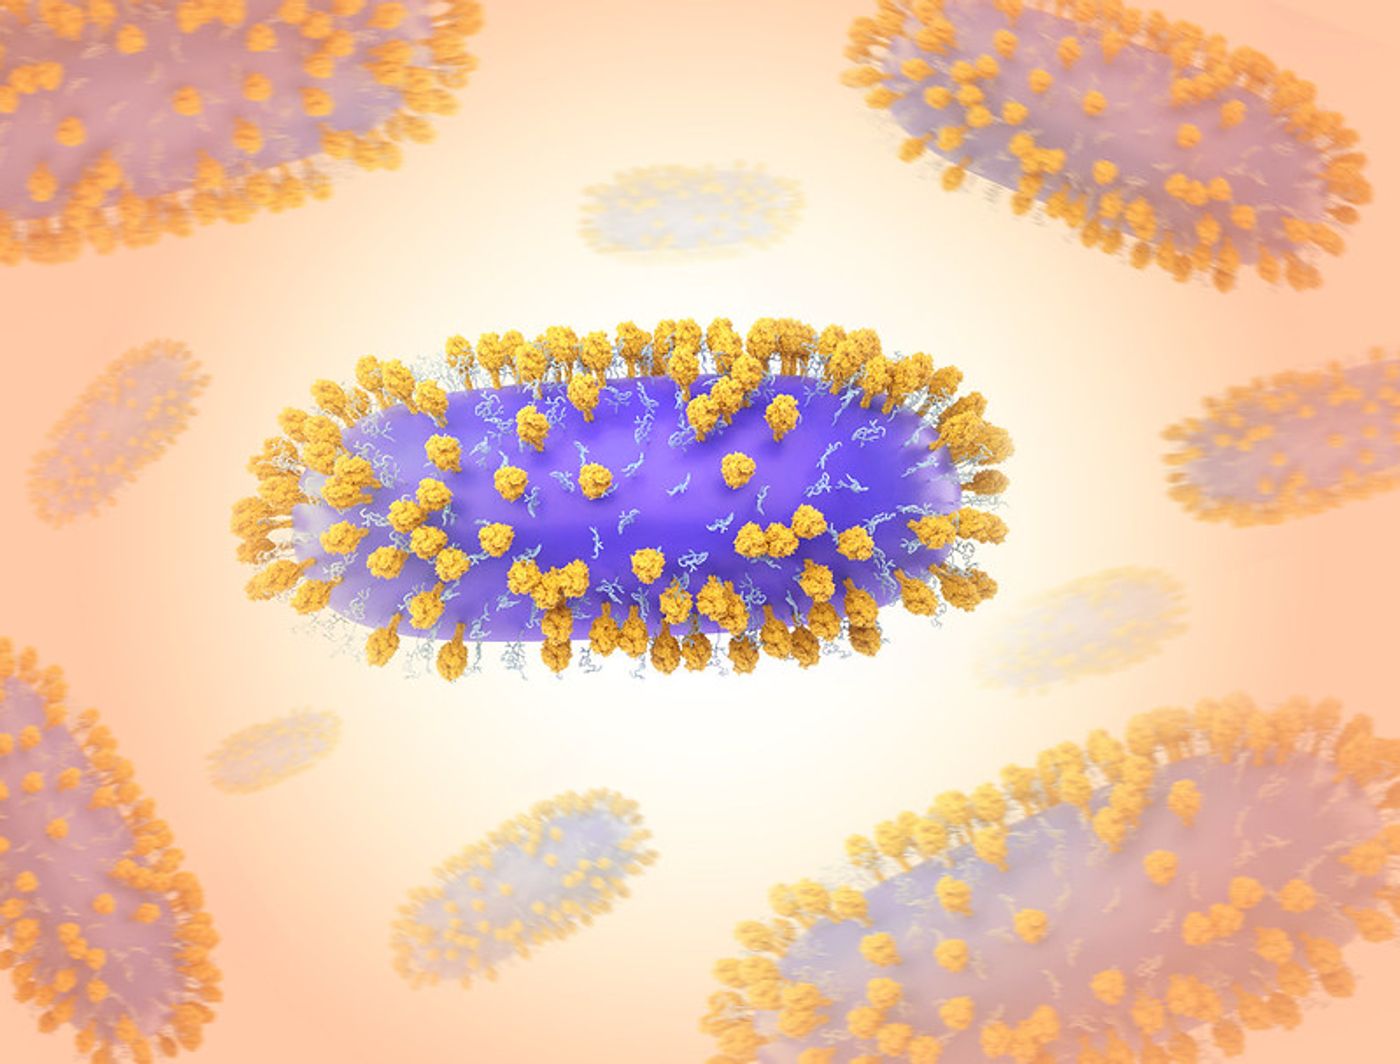 3D renderings of respiratory syncytial virus (RSV)-a common contagious virus that infects the human respiratory tract (the viral envelope is purple, G- glycoproteins are light blue, and F-glycoproteins are orange). F-glycoproteins allow the virus to fuse with and infect human cells. / Credit: NIAID 